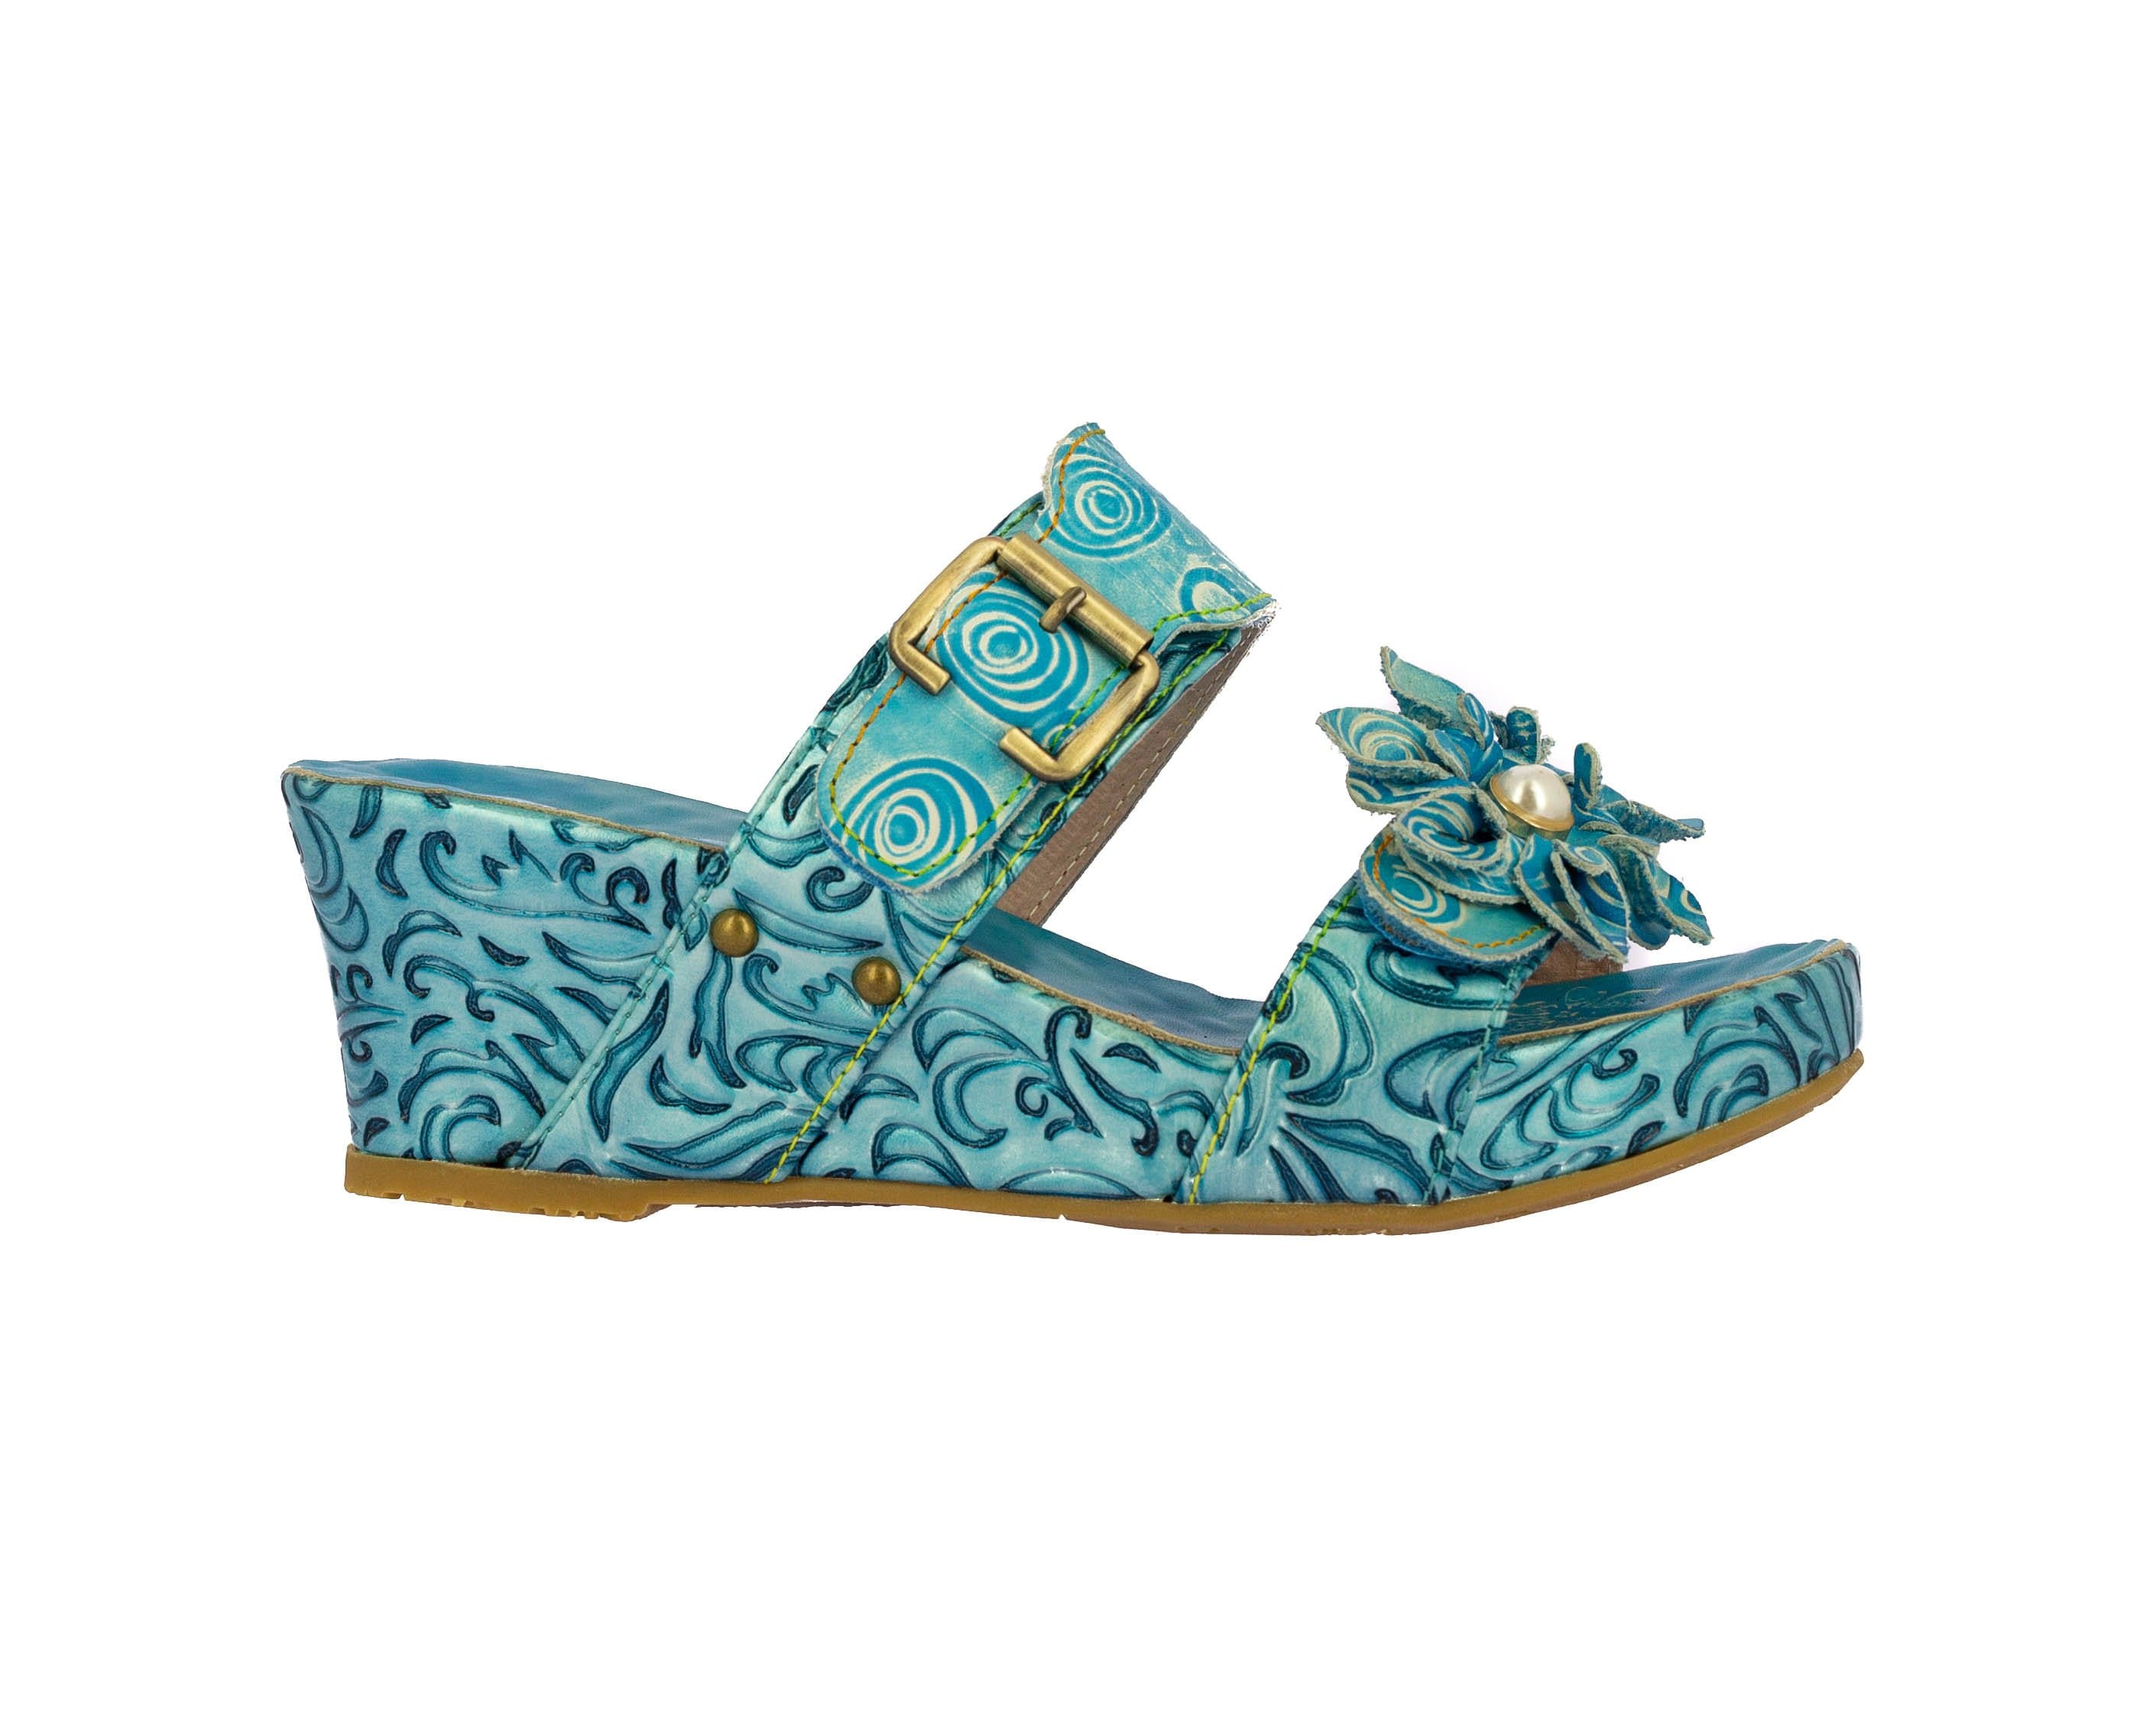 FACDIAO 21 - 35 / TURQUOISE - Mulle shoes